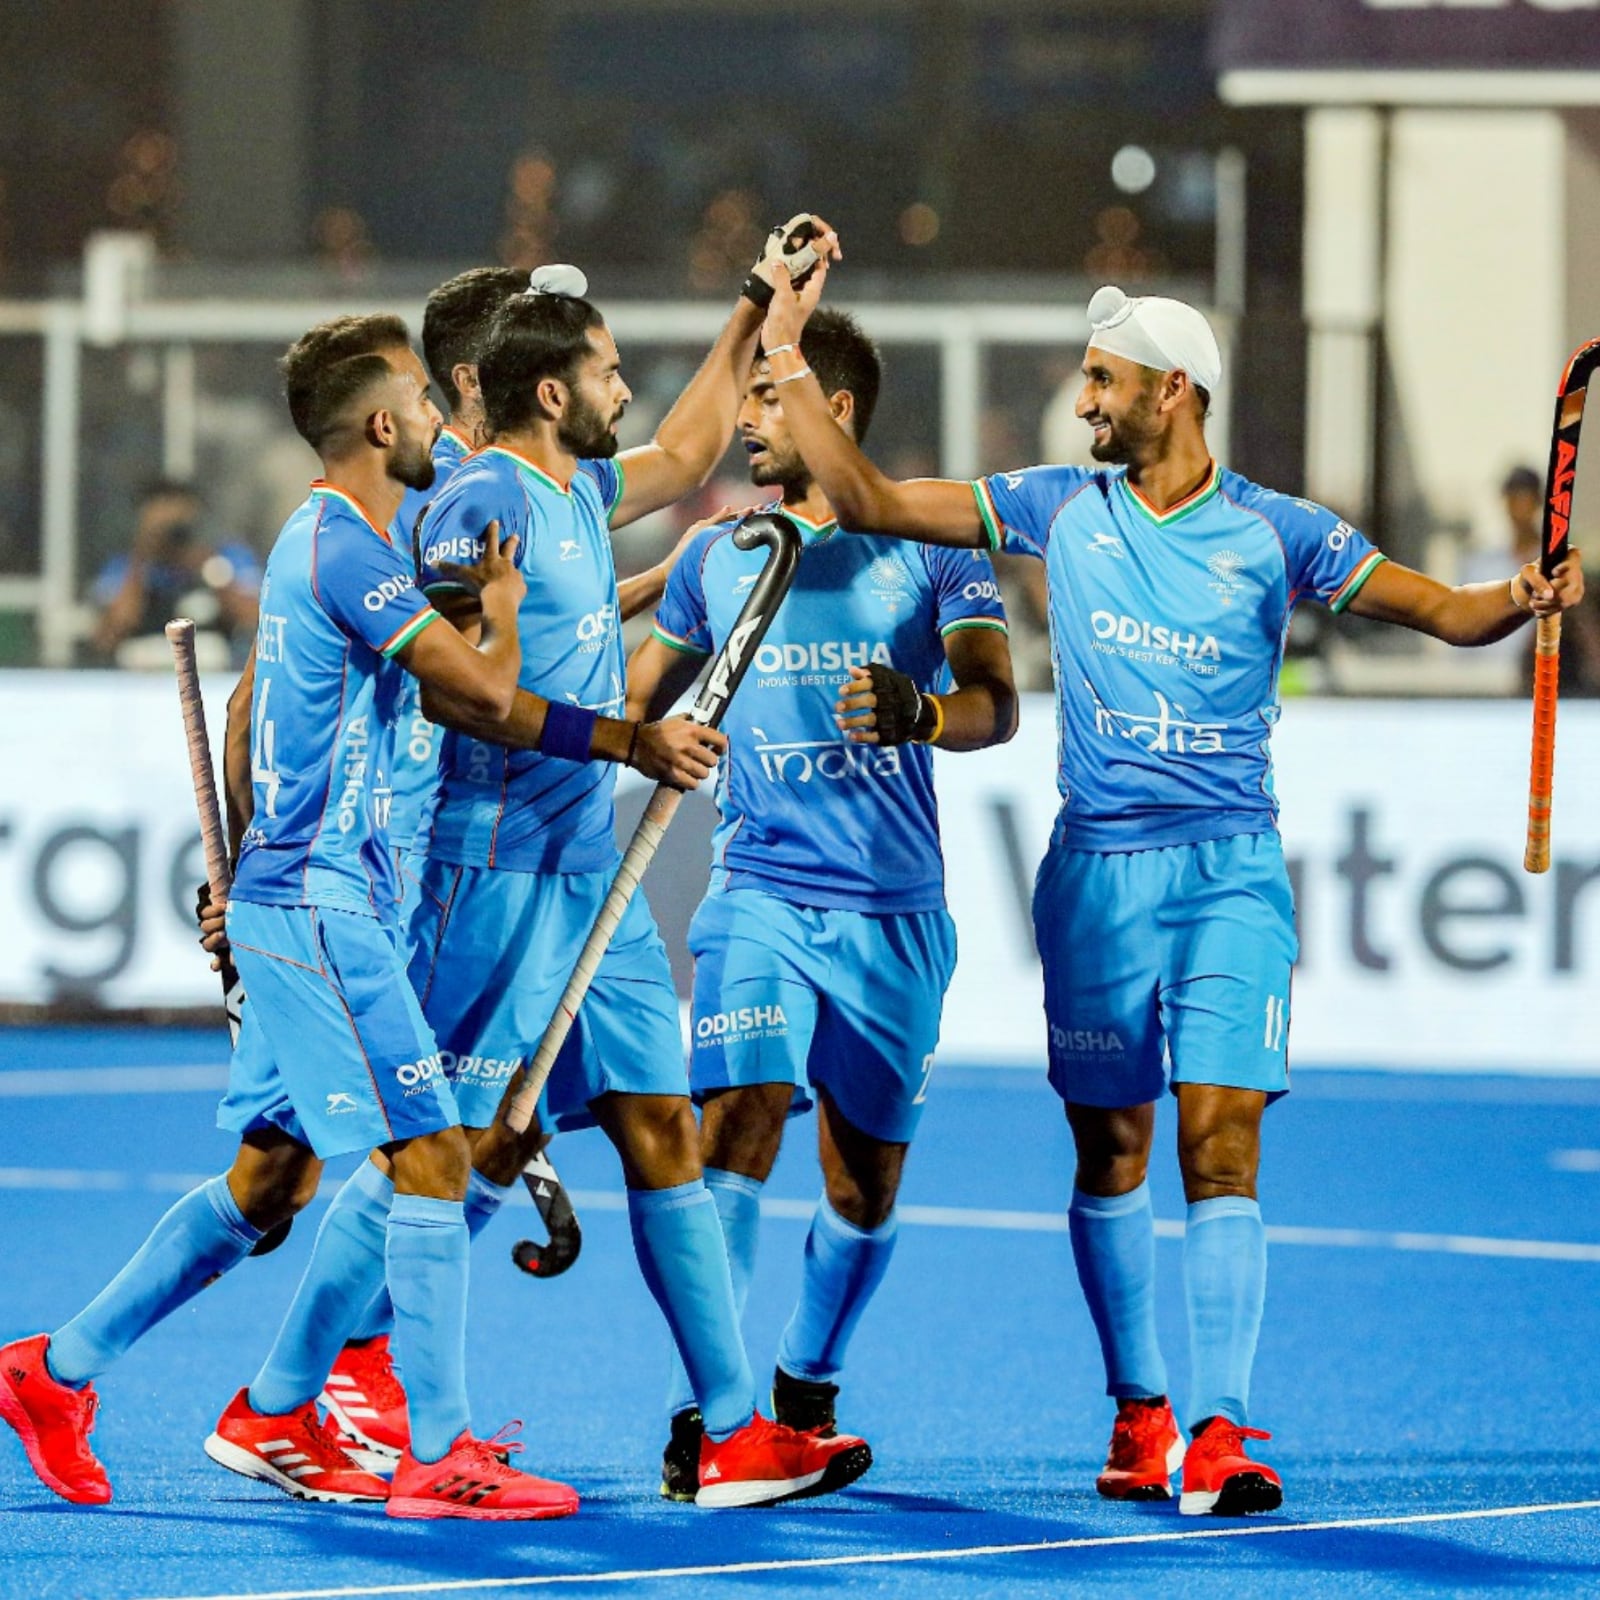 IND vs NZL Highlights FIH Hockey World Cup New Zealand Beat India in Penalty Shootout to Reach Quarters